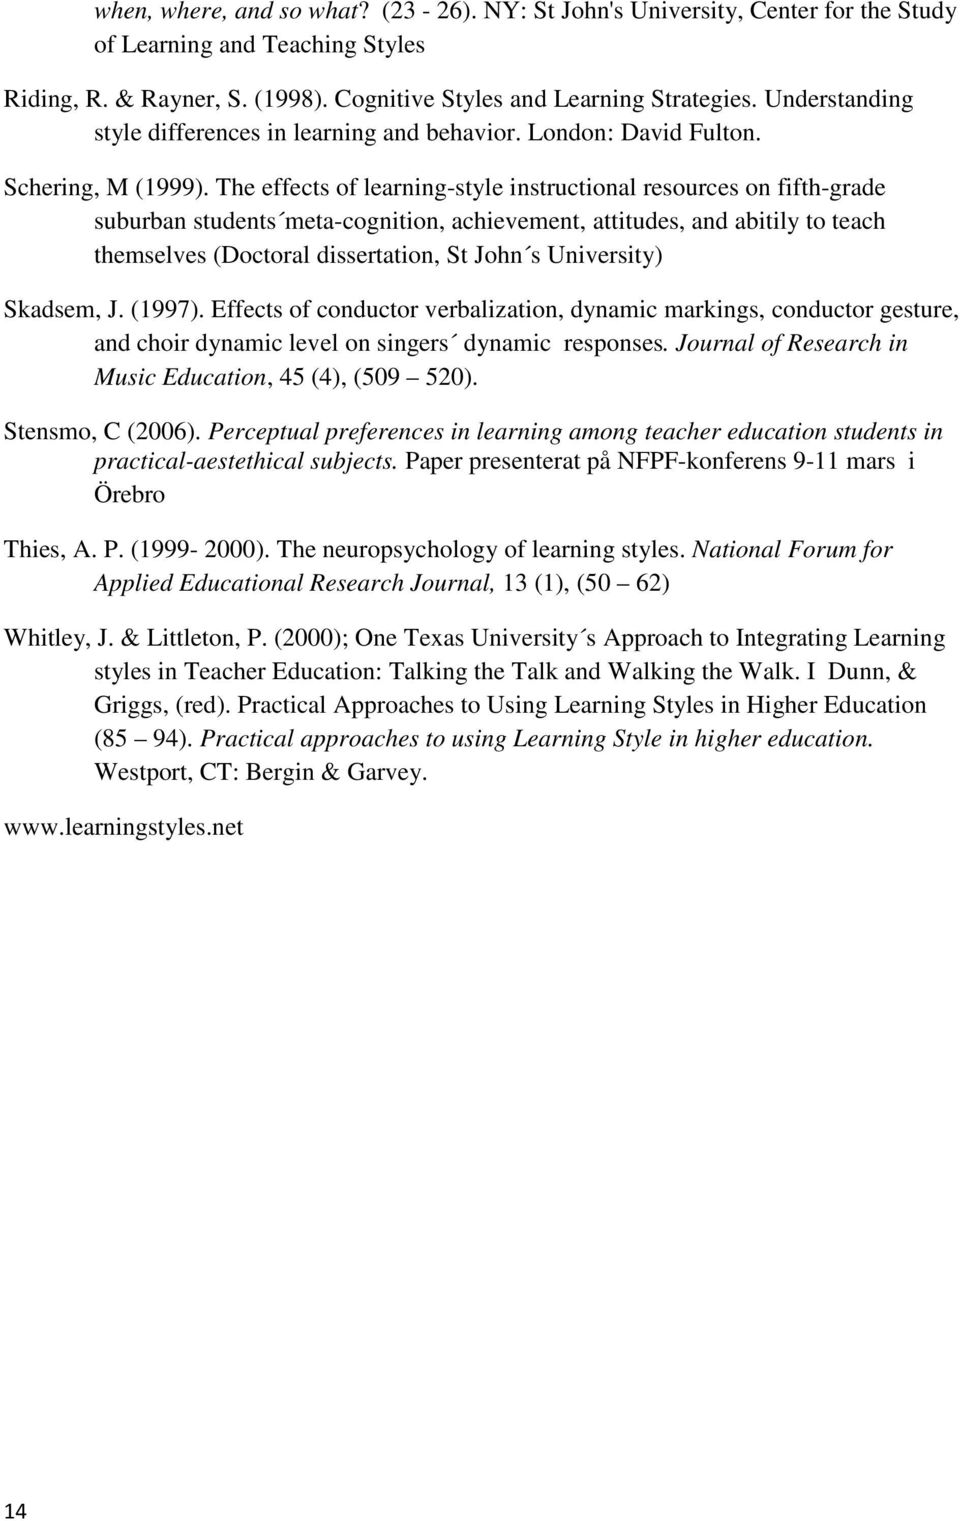 The effects of learning-style instructional resources on fifth-grade suburban students meta-cognition, achievement, attitudes, and abitily to teach themselves (Doctoral dissertation, St John s